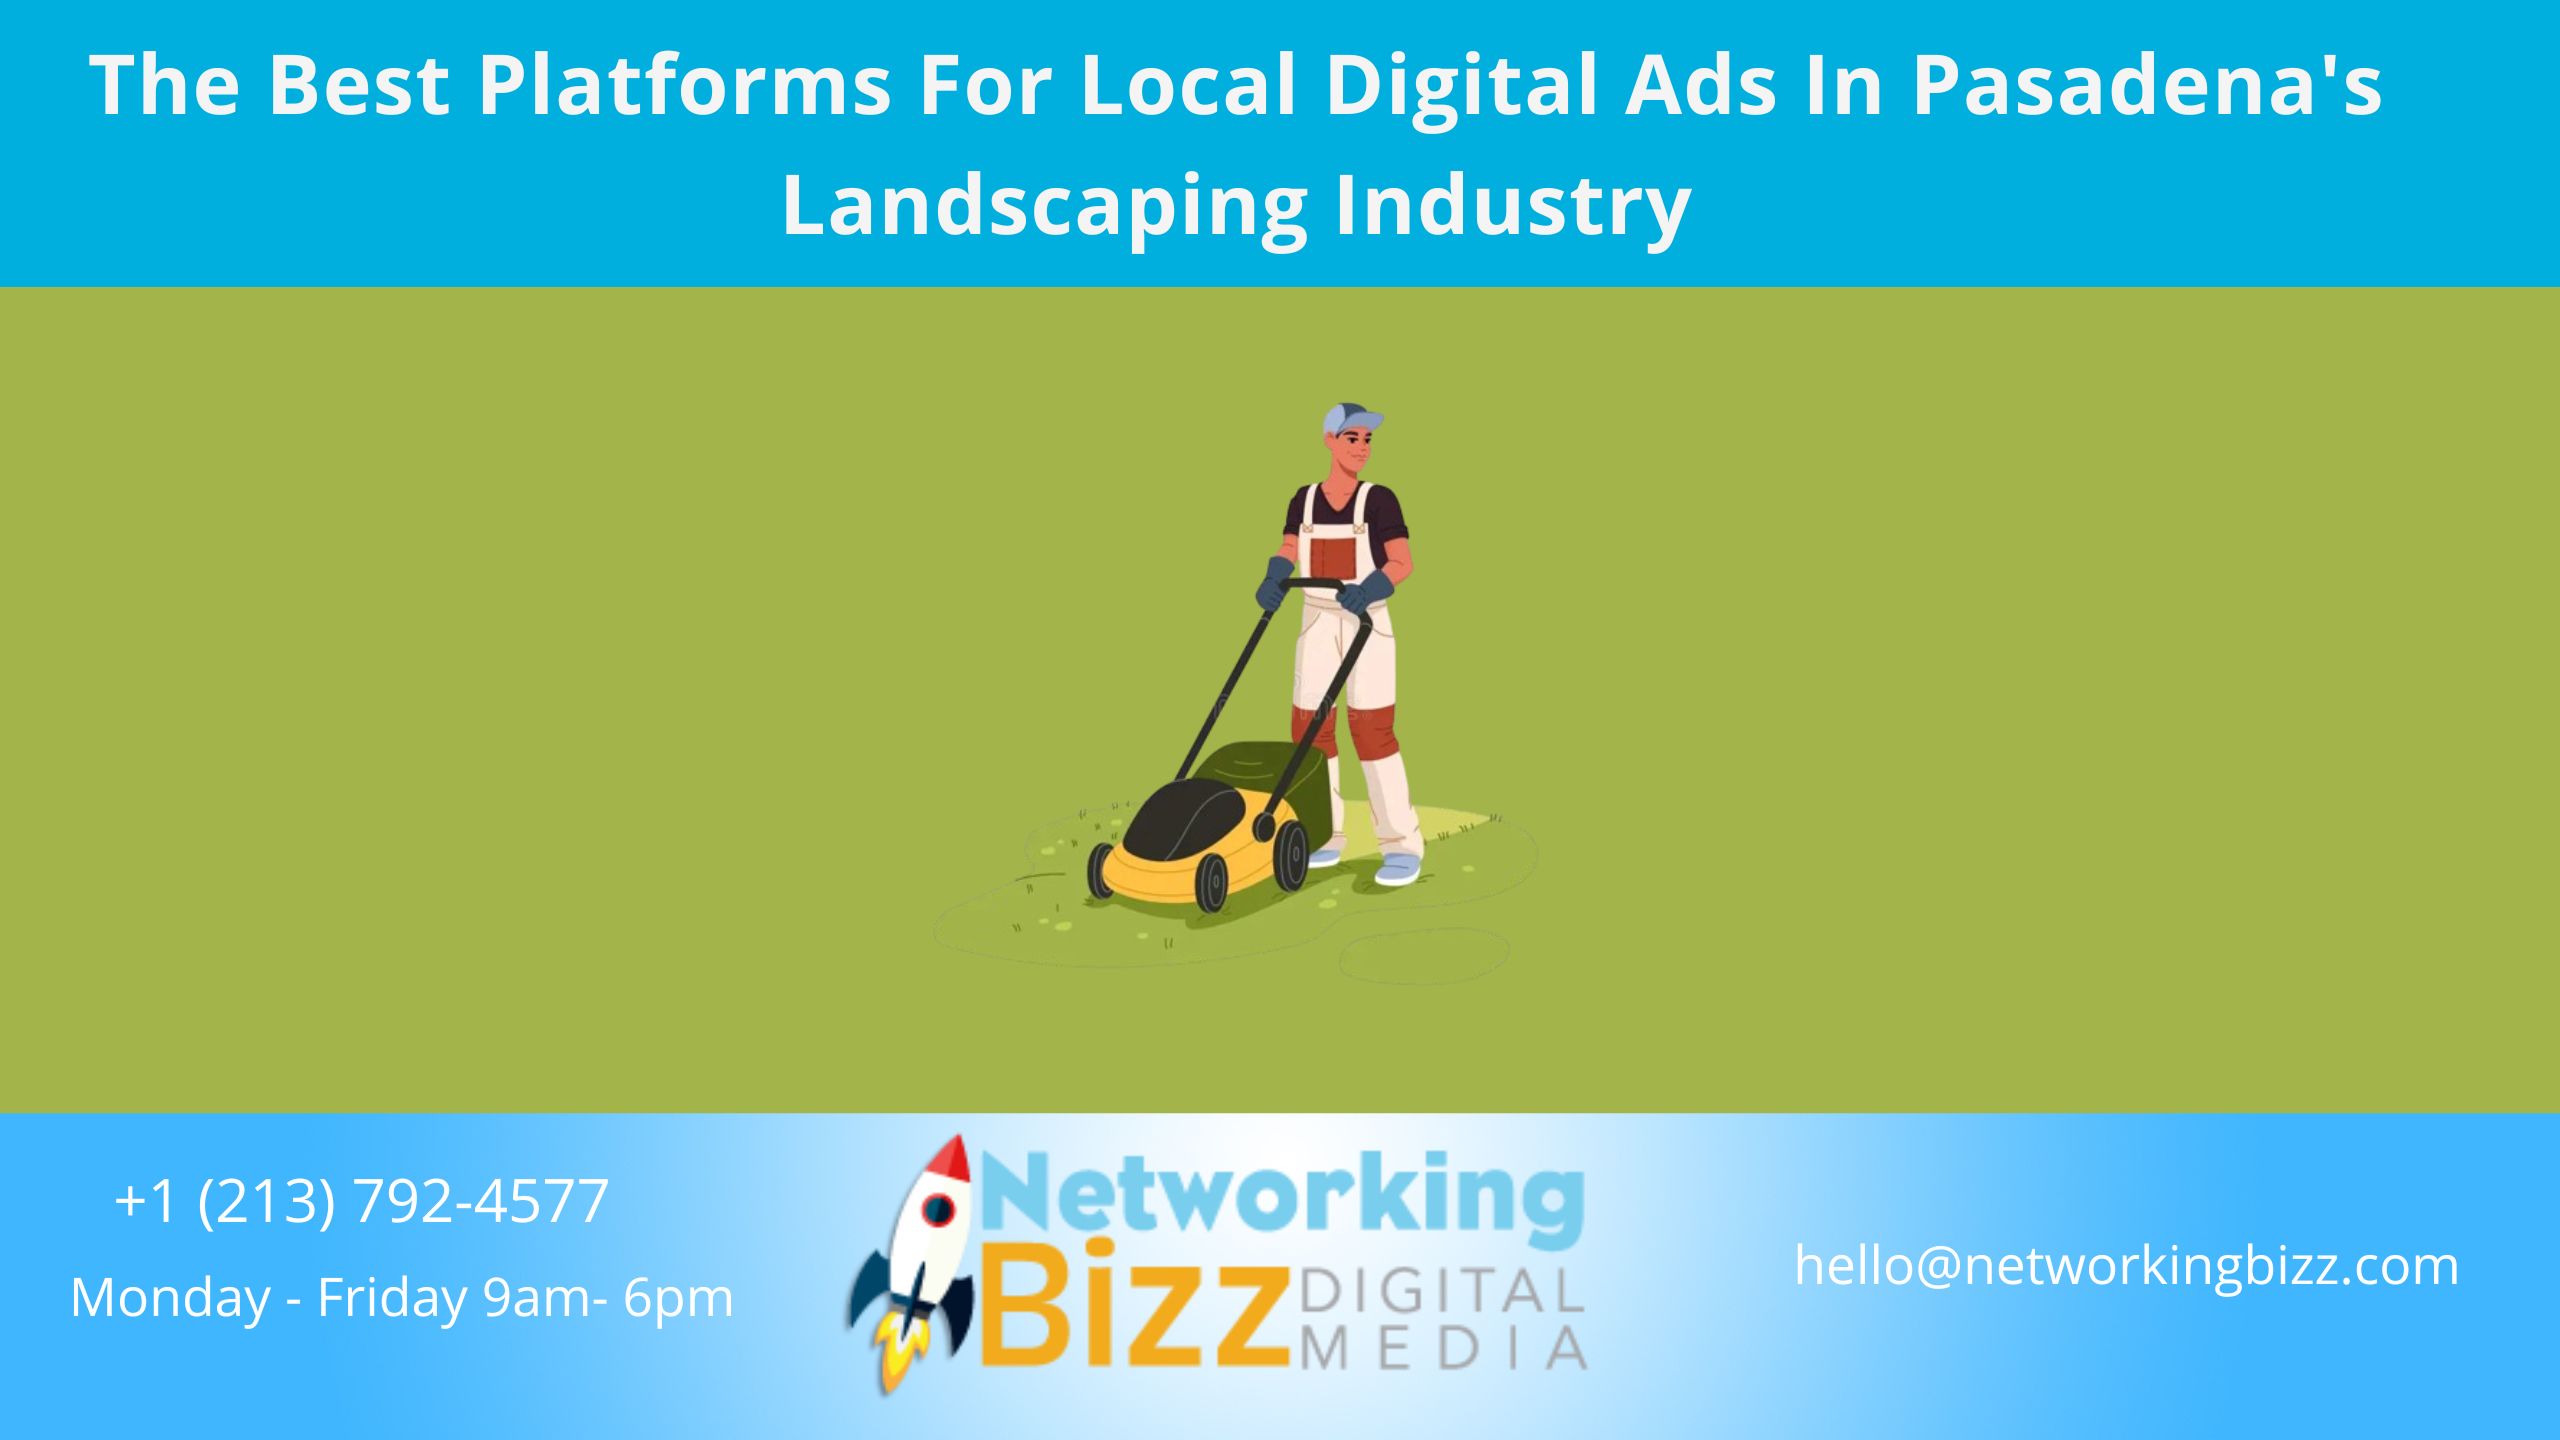 The Best Platforms For Local Digital Ads In Pasadena’s Landscaping Industry